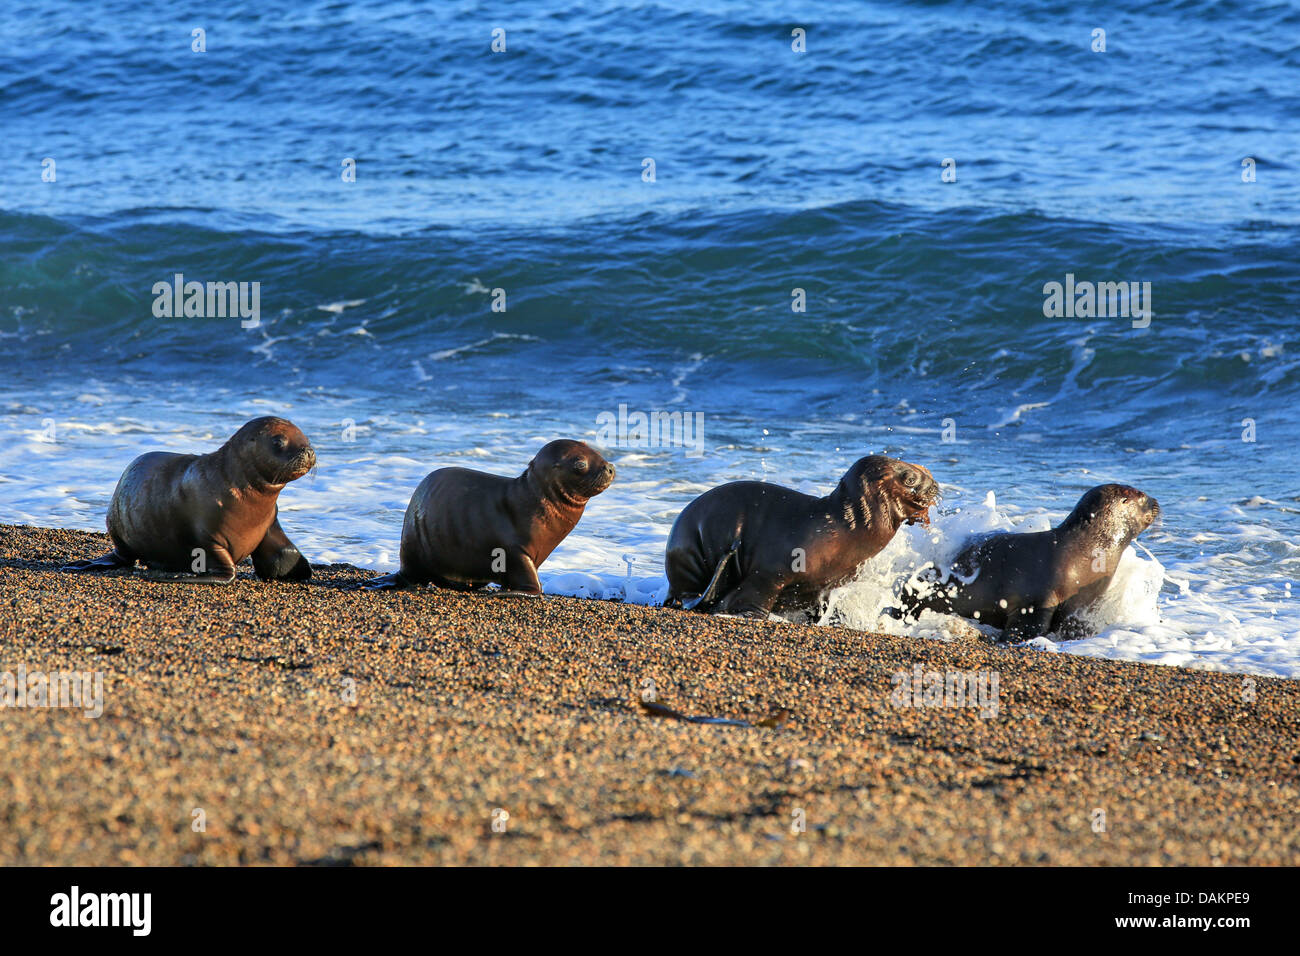 Southern sea lion, South American sea lion, Patagonian sea lion (Otaria flavescens, Otaria byronia), puppies crawling to the surf, Argentina, Patagonia, Valdes Stock Photo